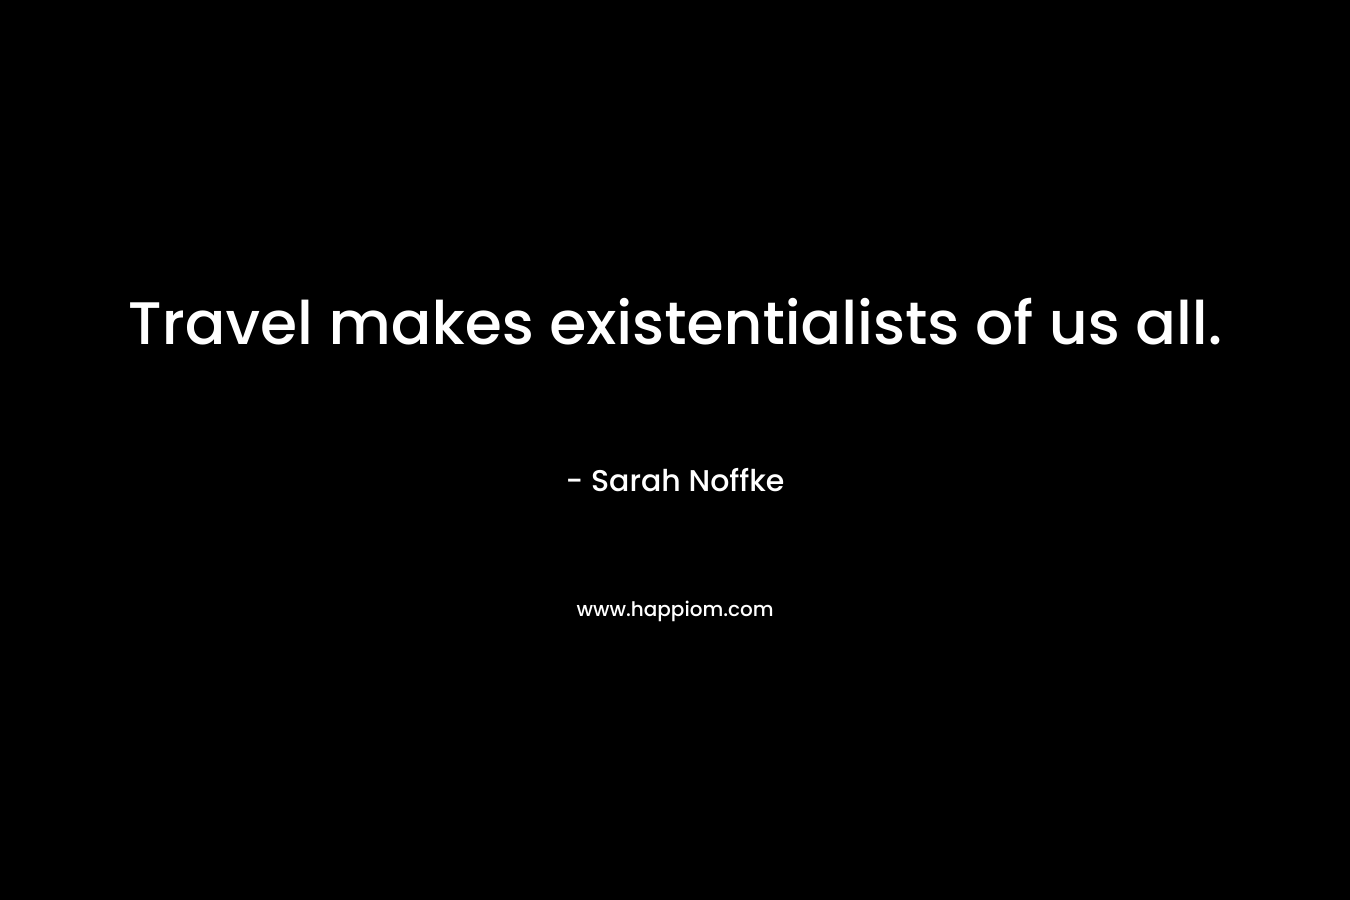 Travel makes existentialists of us all.